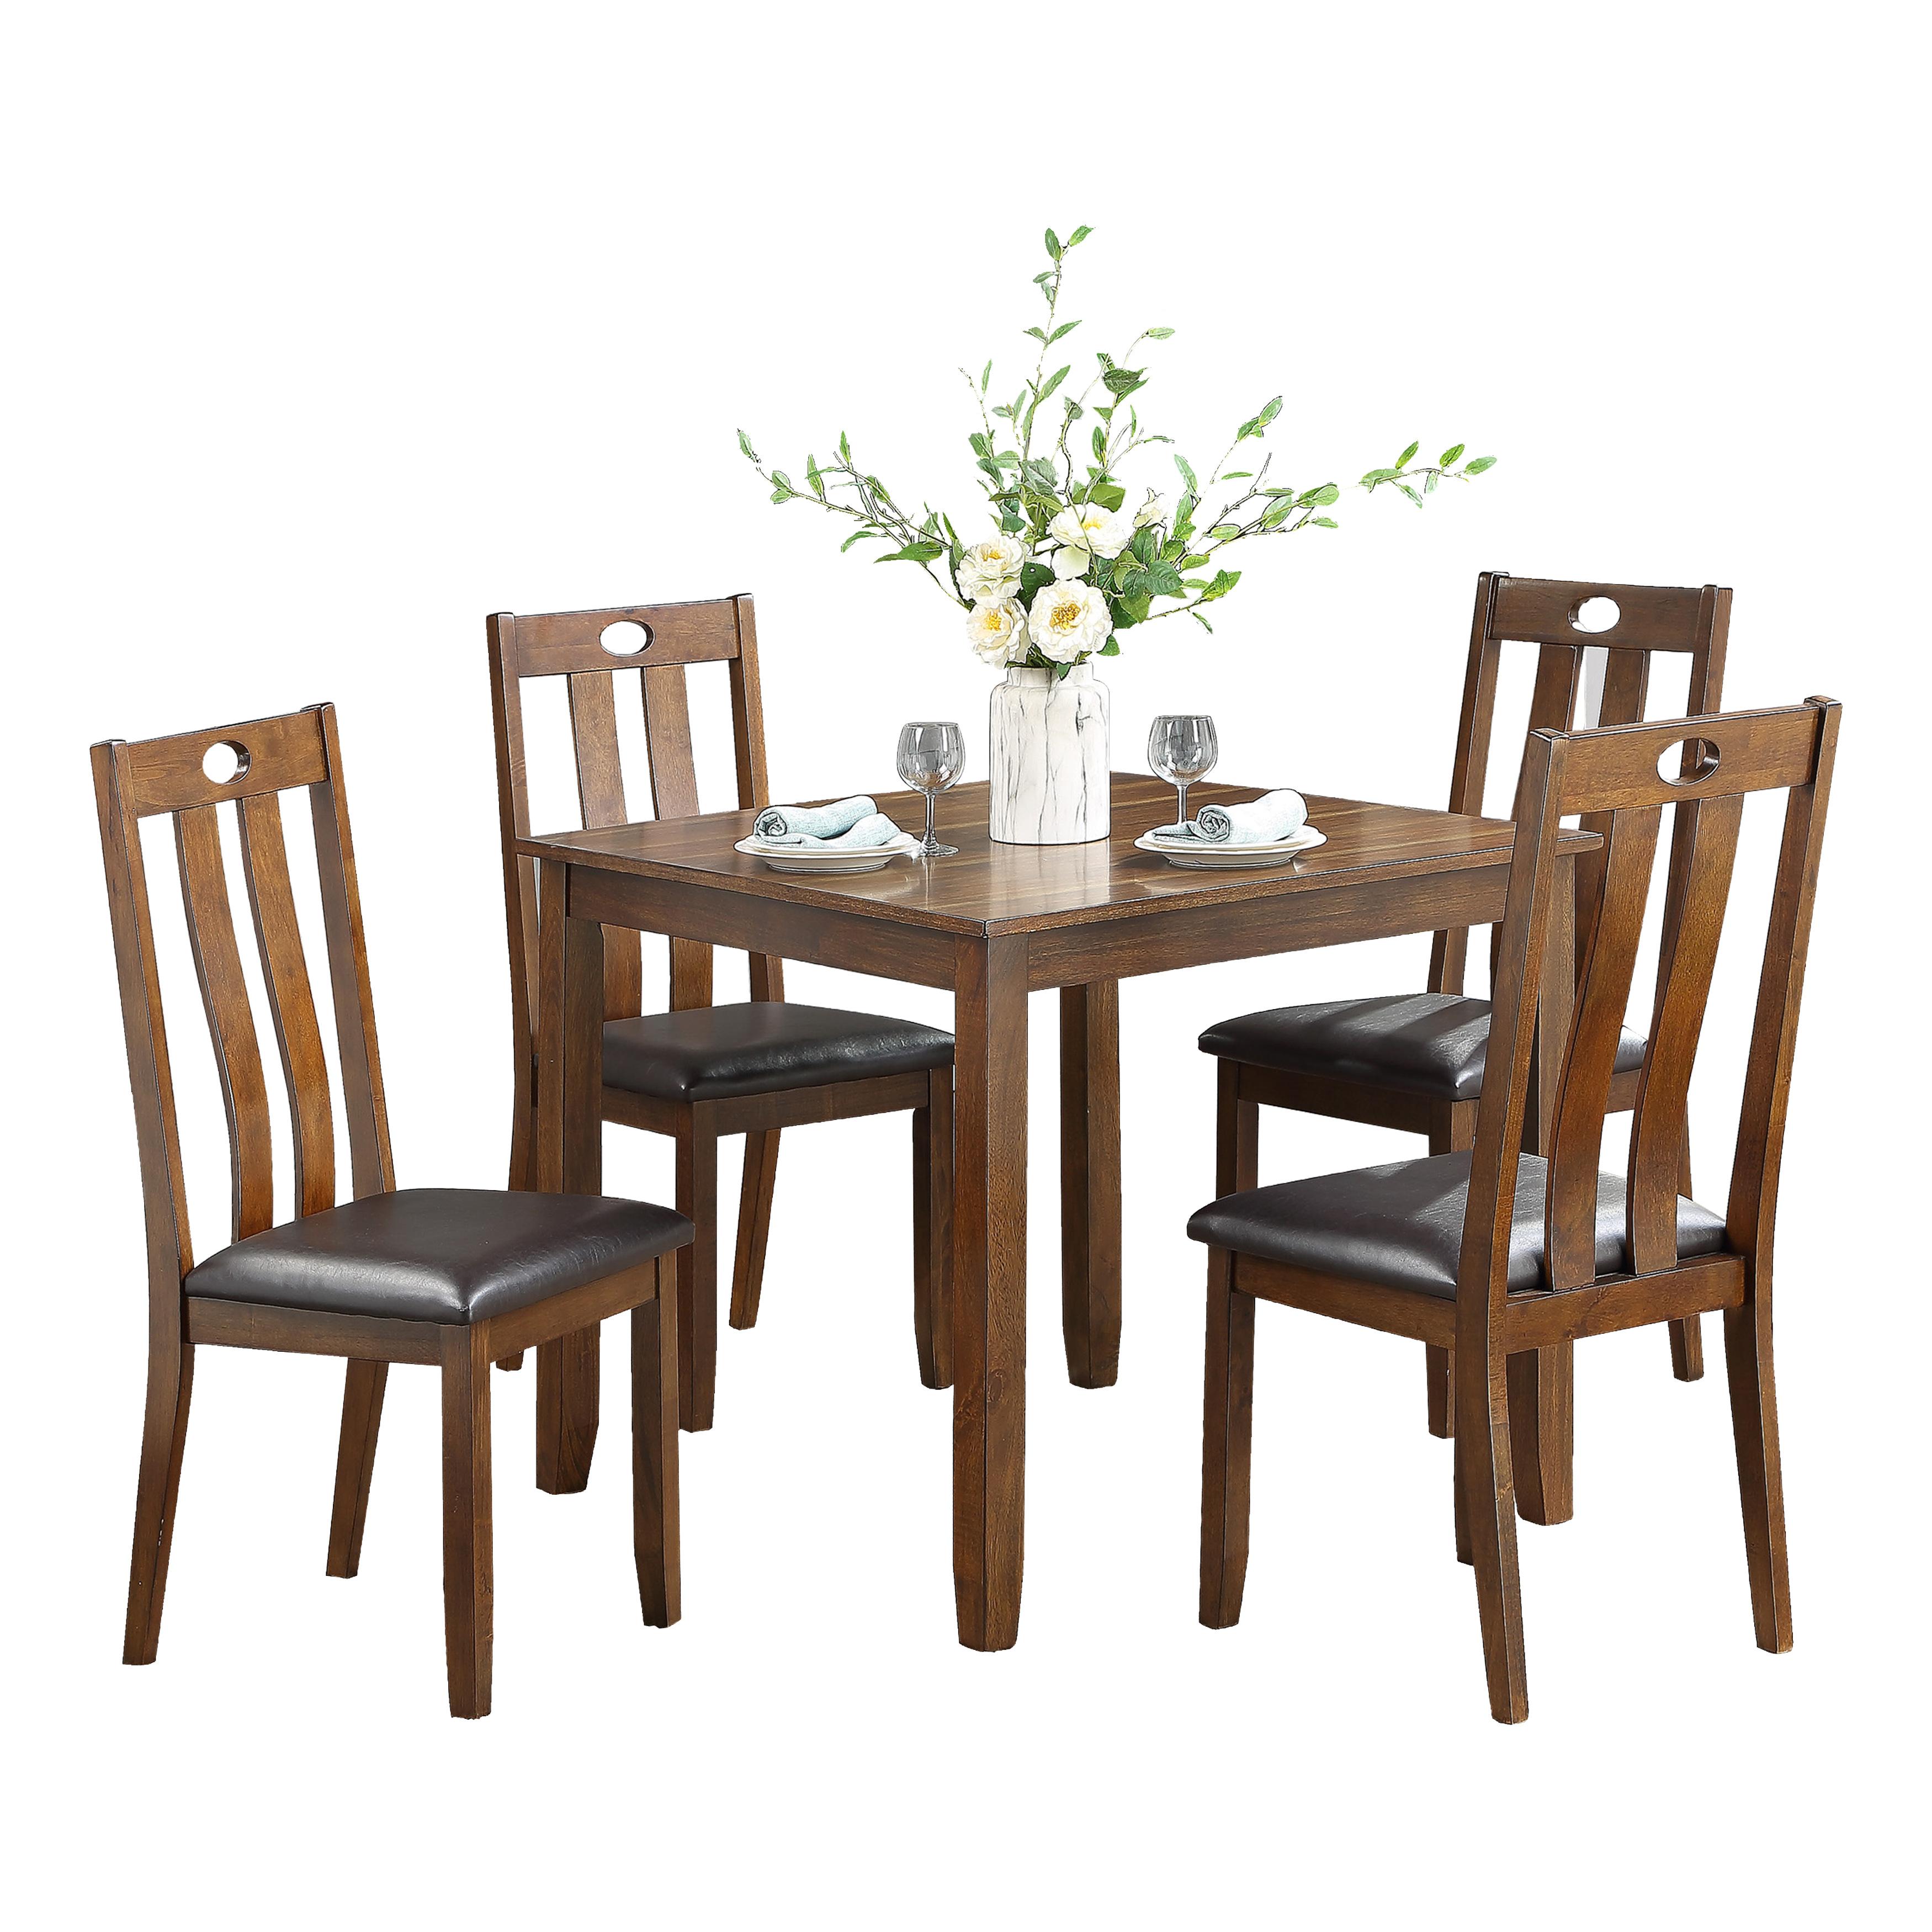 Transitional Dining Room Set 5746 Weston 5746 in Brown Faux Leather